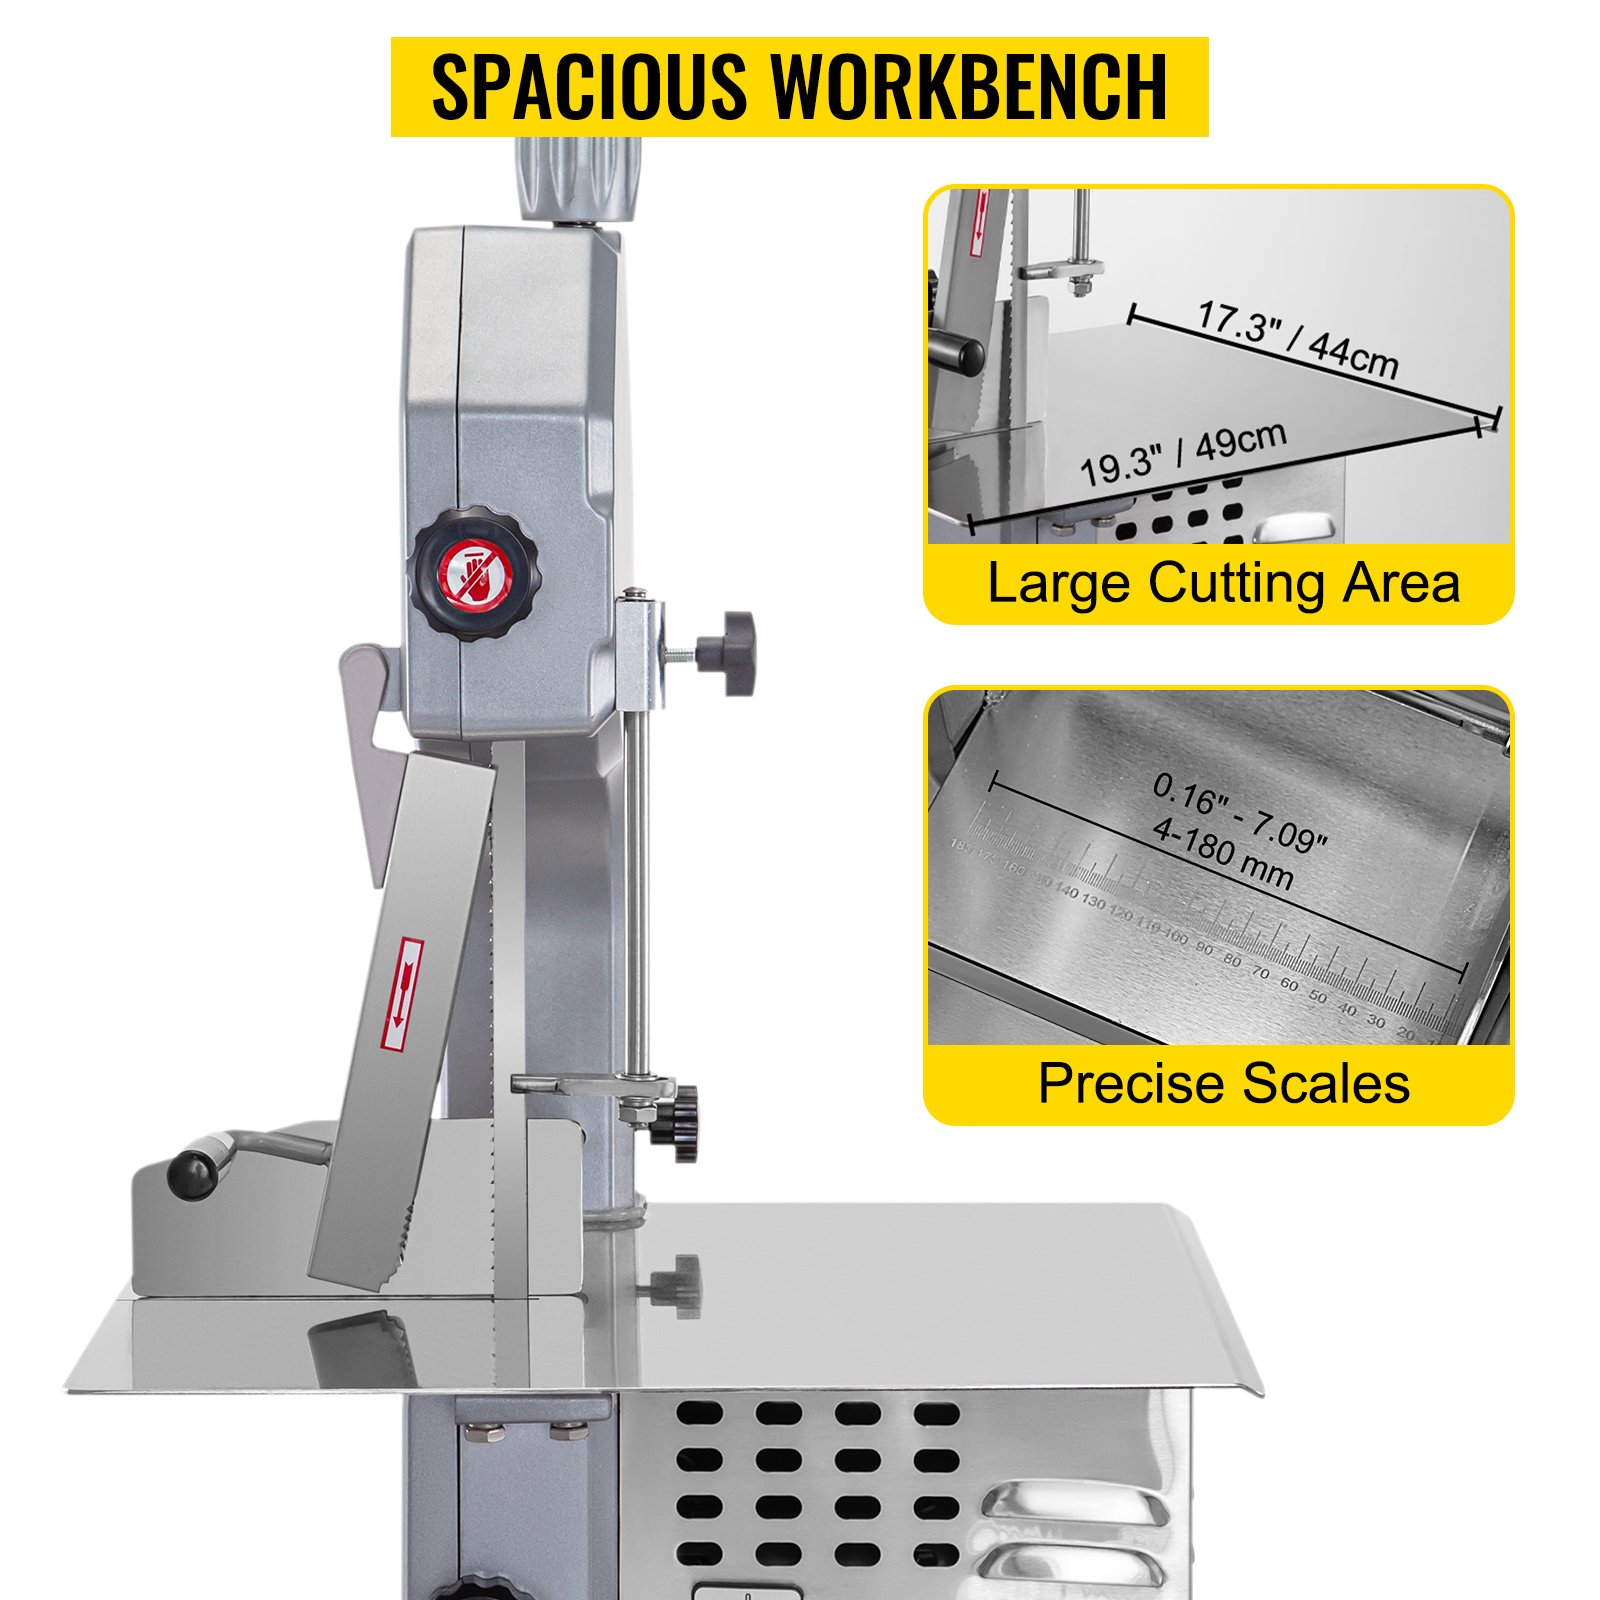 VEVOR 110V Bone Saw Machine, 1500W Frozen Meat Cutter, 2.1HP Butcher  Bandsaw, Thickness Range 4-180mm, Max Cutting Height 215mm, Worktable  19.3x17.3inch, Sawing Speed 19m/s, Equipped with Saw Blades VEVOR US